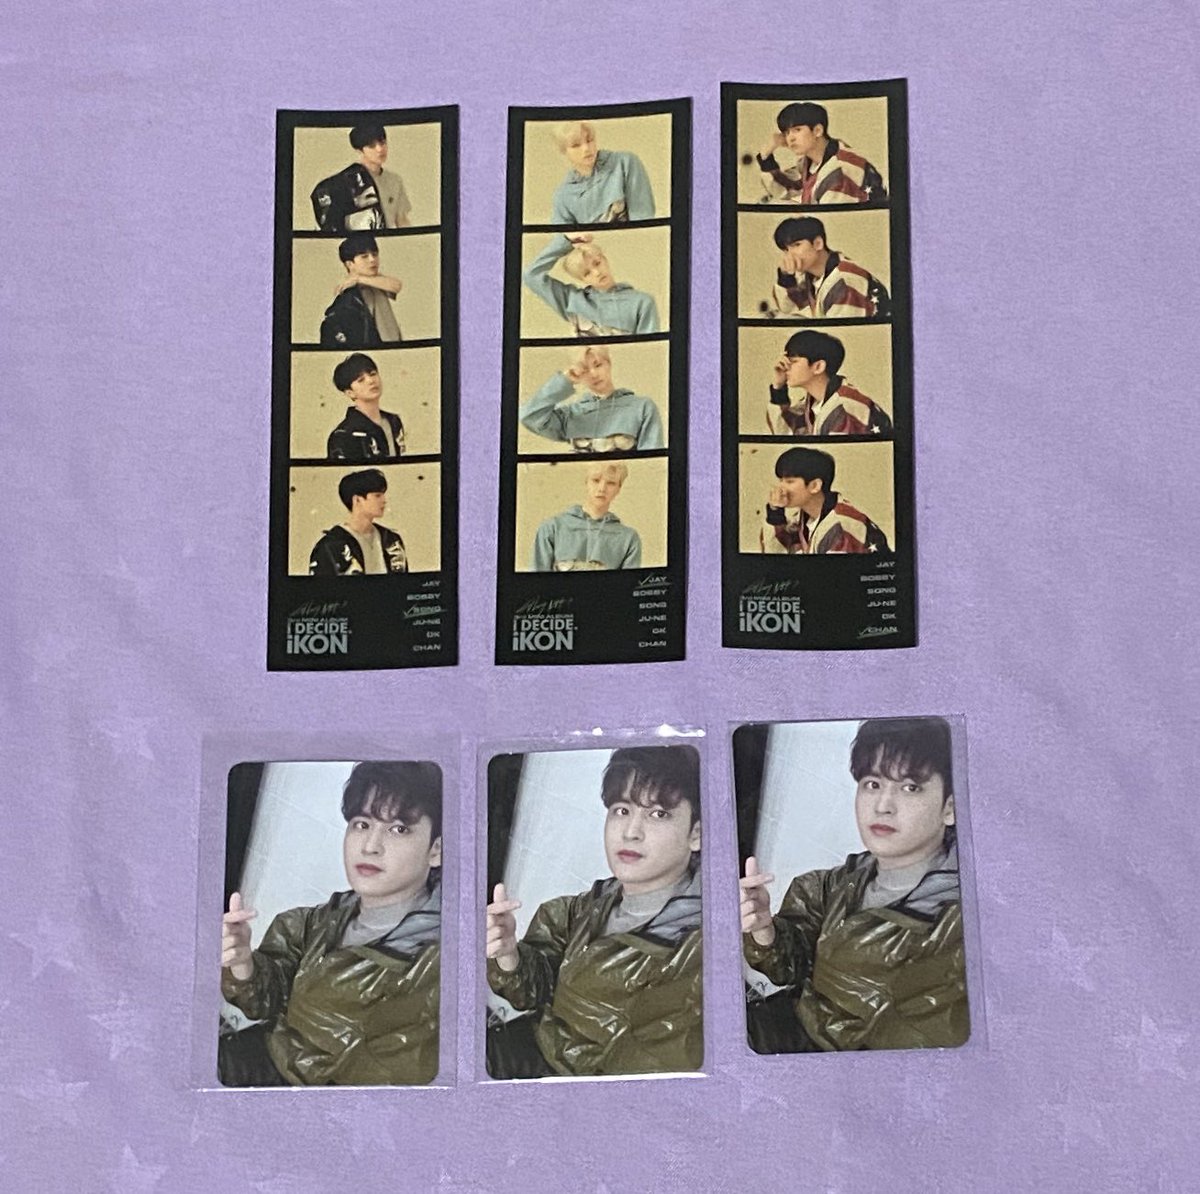 WTS | LFB [Help RT]WW   Paypal  -Prices in USD-Selling iKON iDECIDE 4-Cut Photostrips and PhotocardsiDecide [Green] Photostrips (Jinhwan Yunhyeong Chanwoo)- $5iDecide [Green] PC (Chanwoo)- $6$10 for a set of 1 Photostrip + 1 Photocard~DM for more details!~